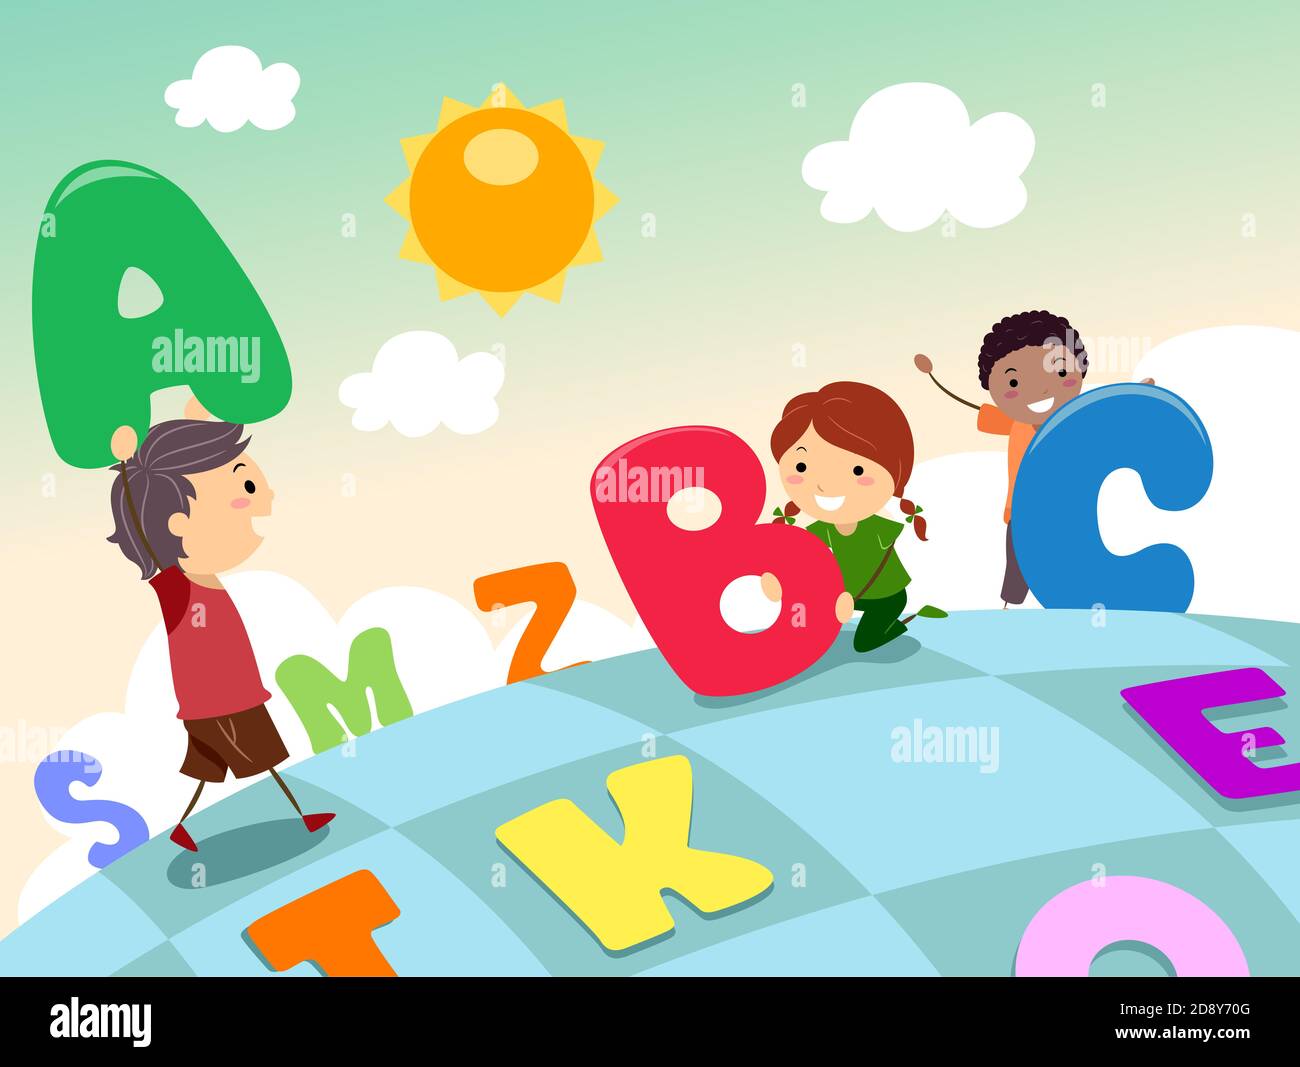 Illustration of Stickman Kids Playing Board Game with Big Letters of the Alphabet Stock Photo